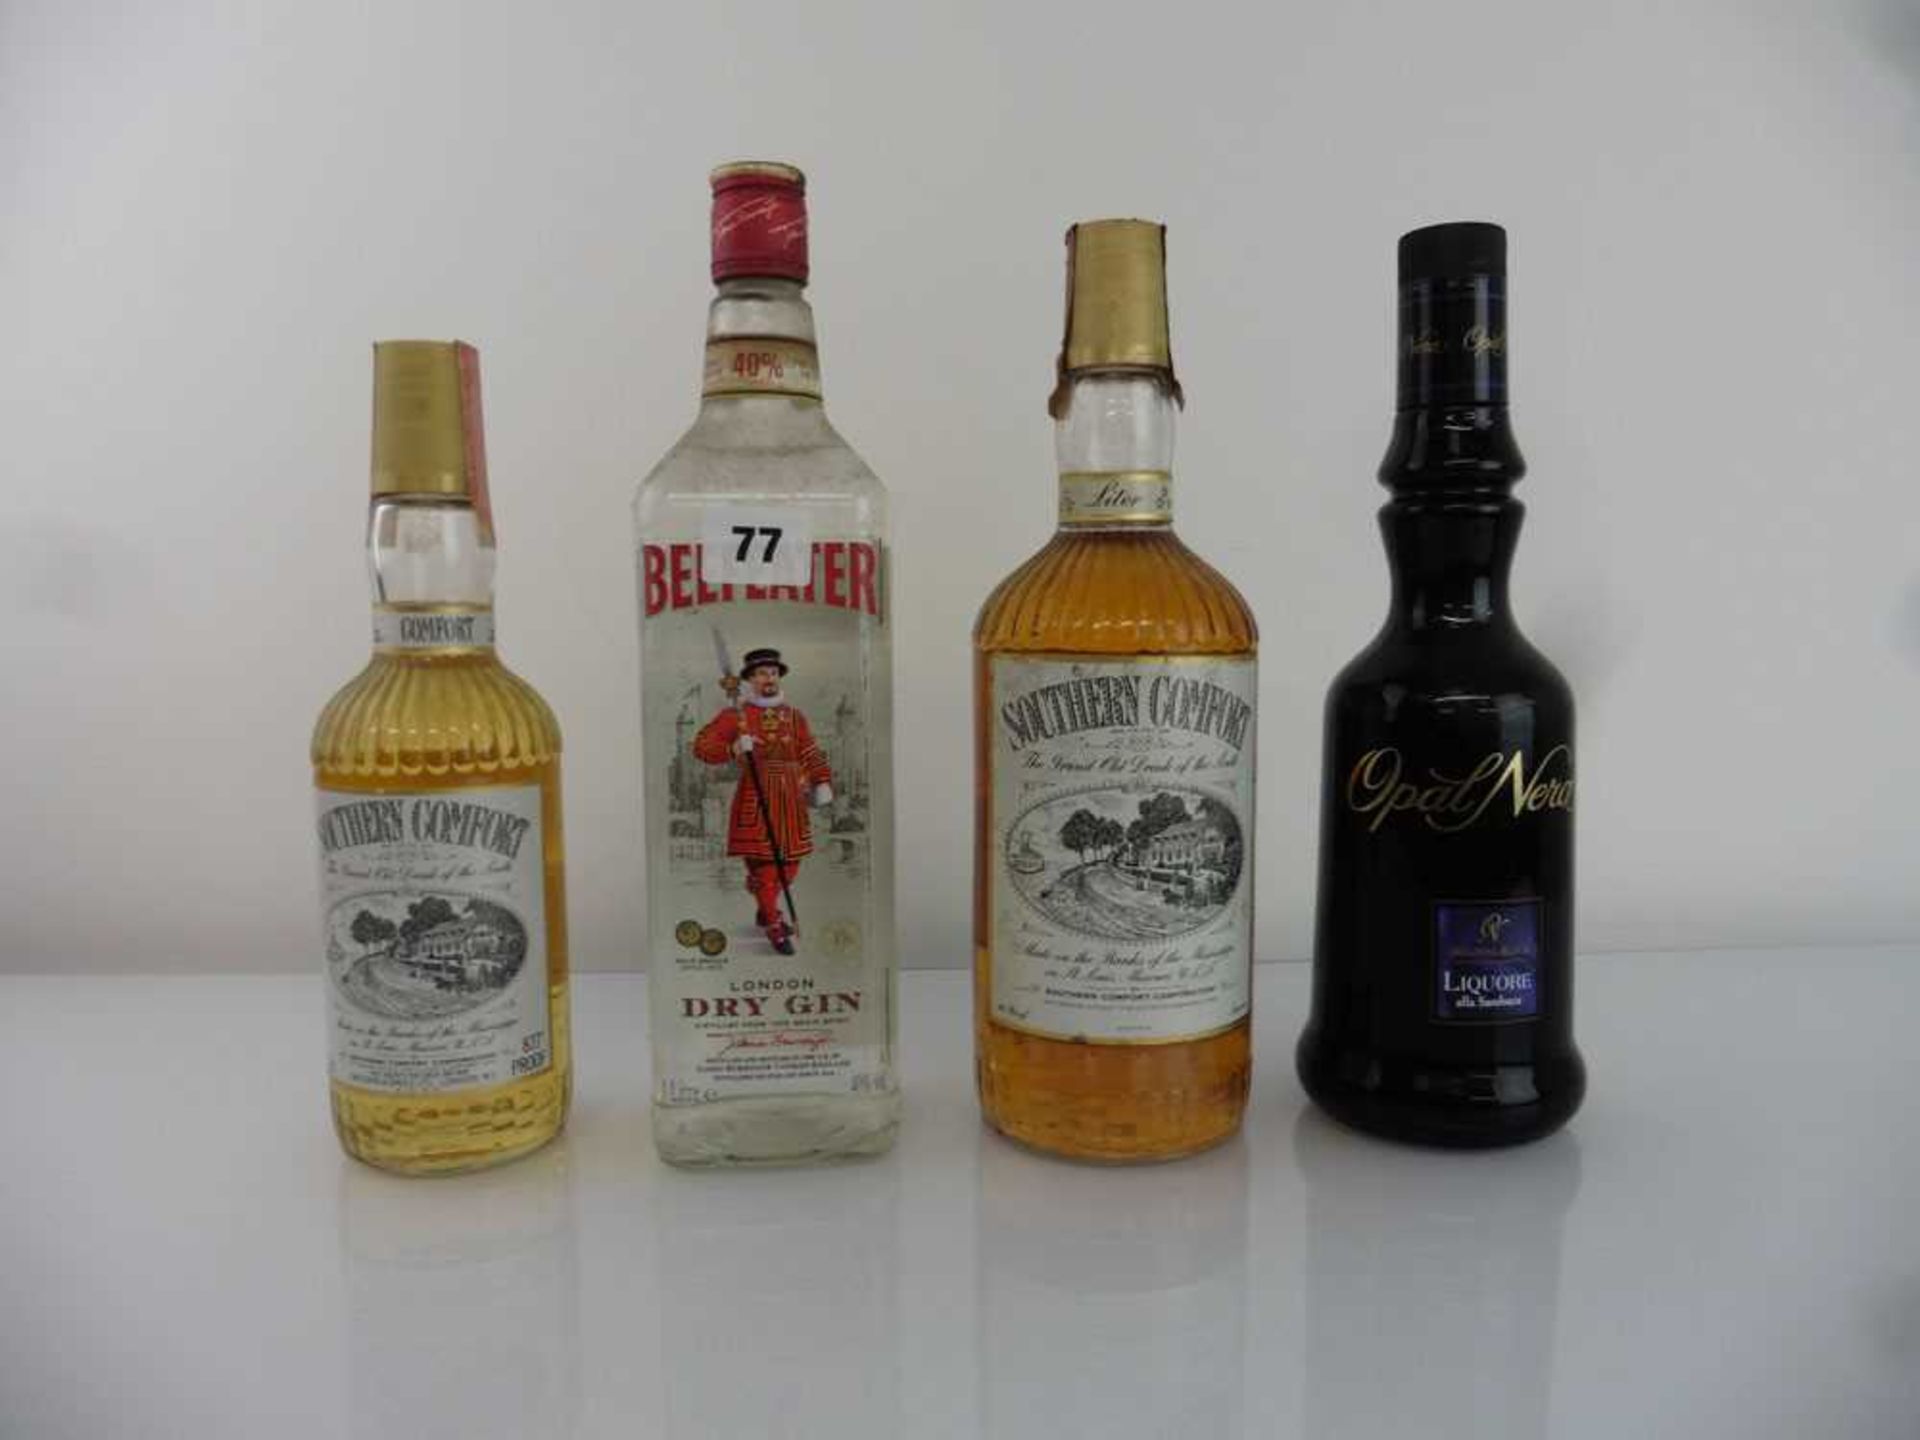 4 bottles, 1x Beefeater London Dry Gin 40% 1 litre, 2x Southern Comfort 86proof 1 litre / 87.